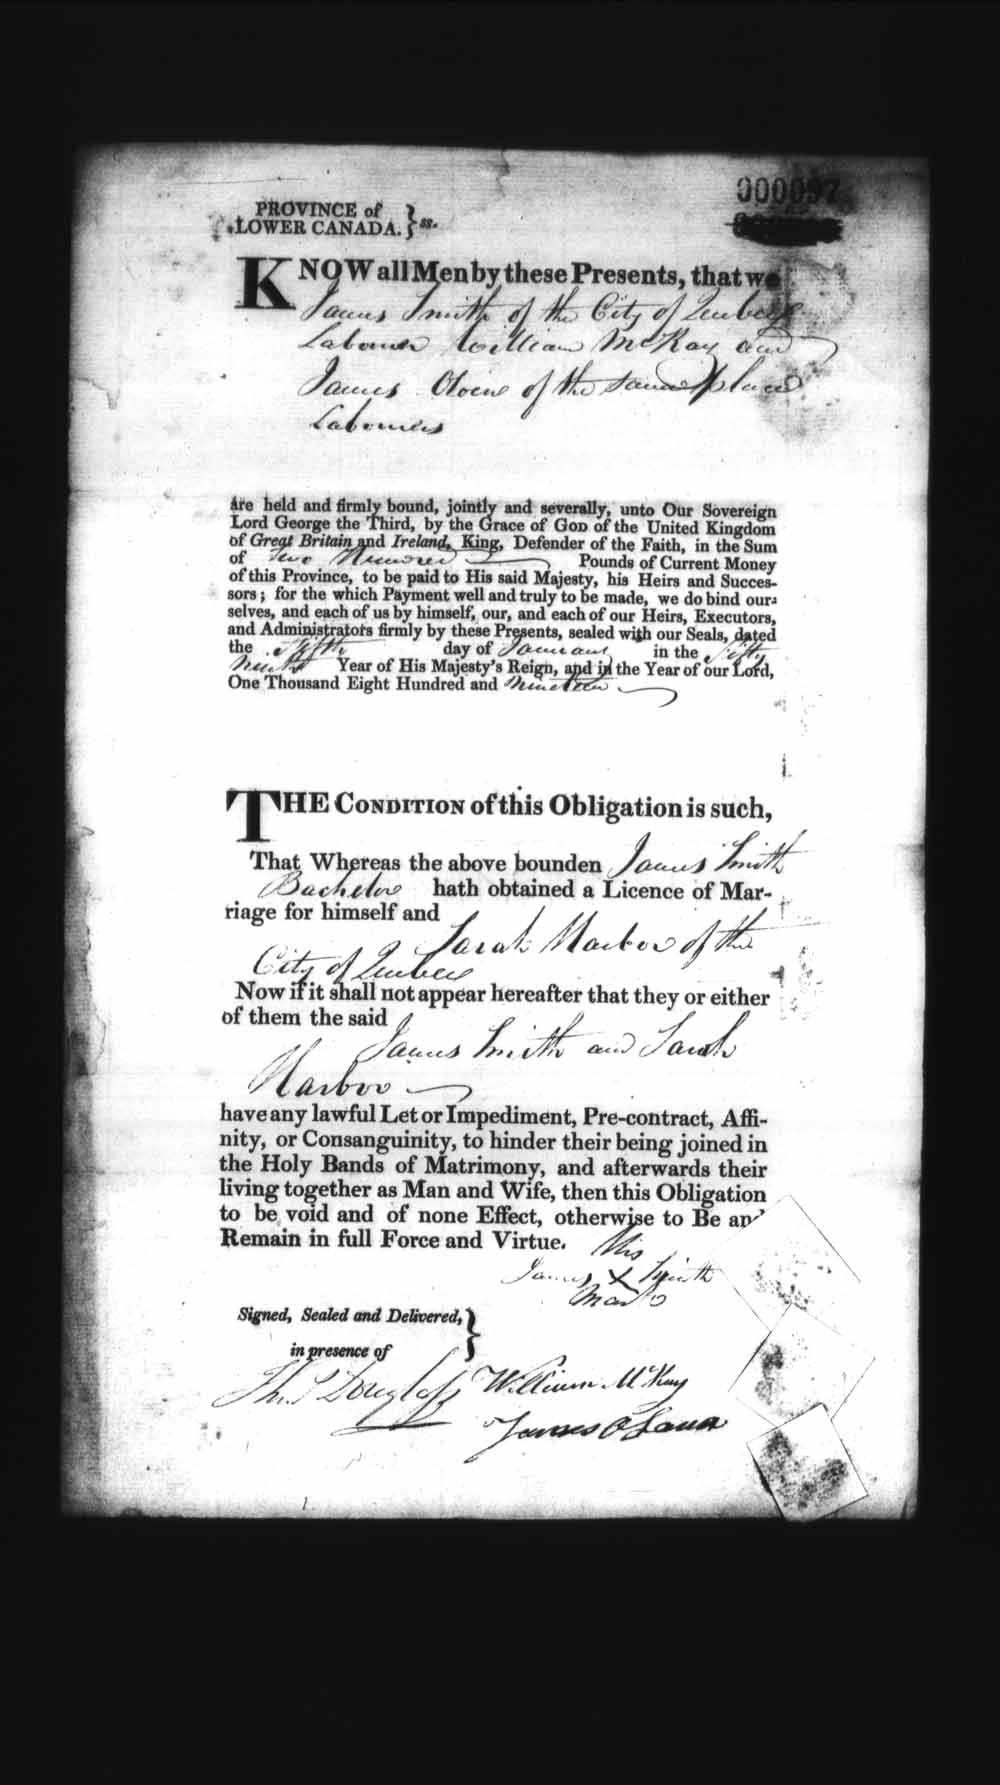 Digitized page of Upper and Lower Canada Marriage Bonds (1779-1865) for Image No.: e008235926